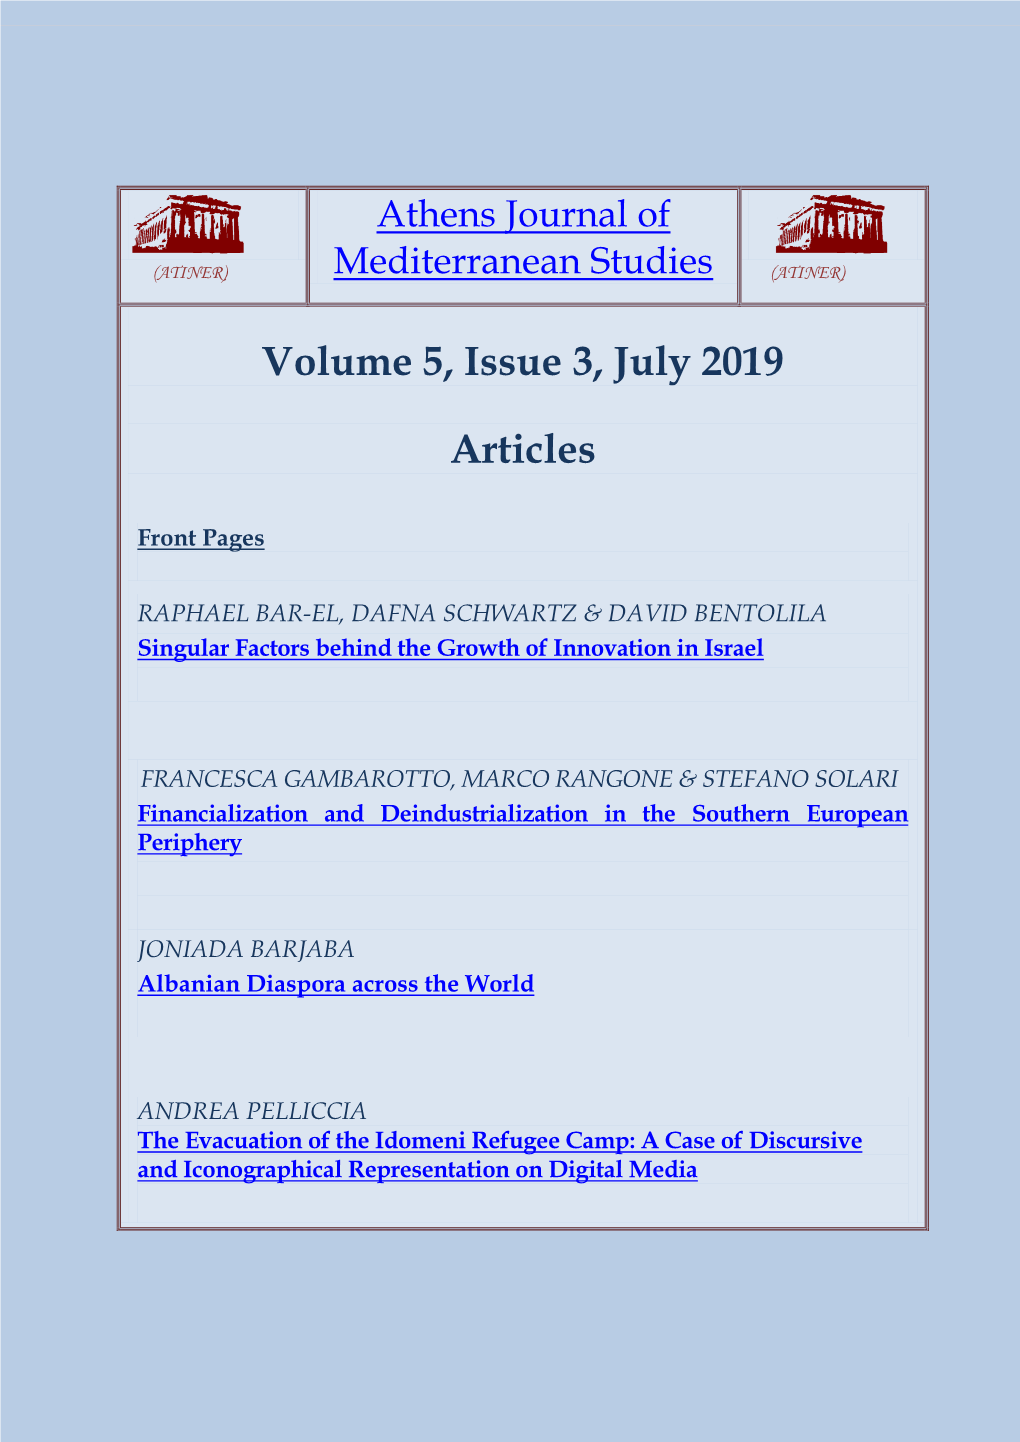 Volume 5, Issue 3, July 2019 Articles